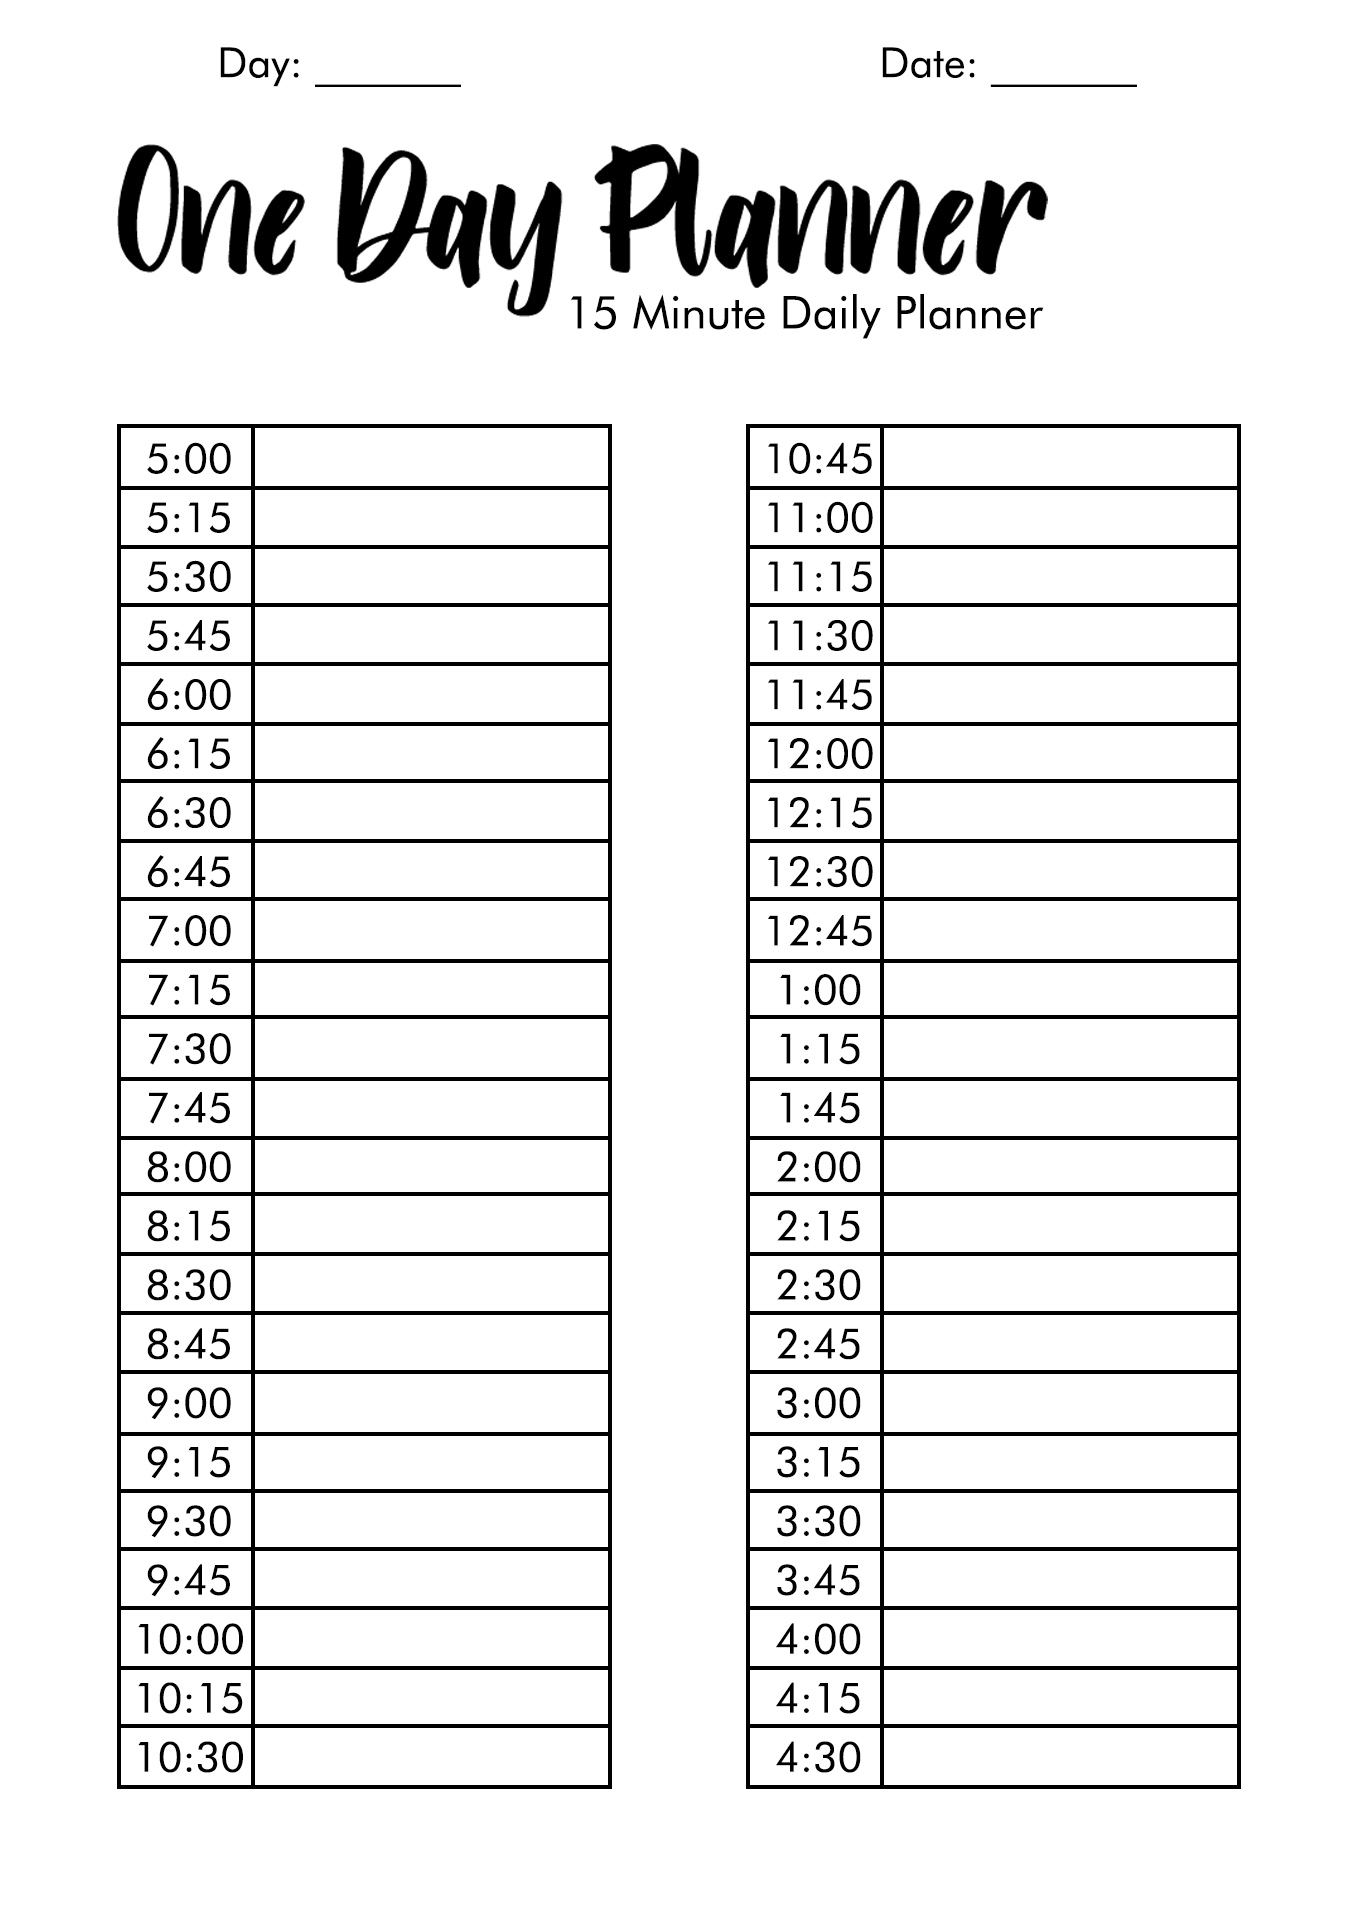 Printable Daily Schedule 15 Minute Increments Image